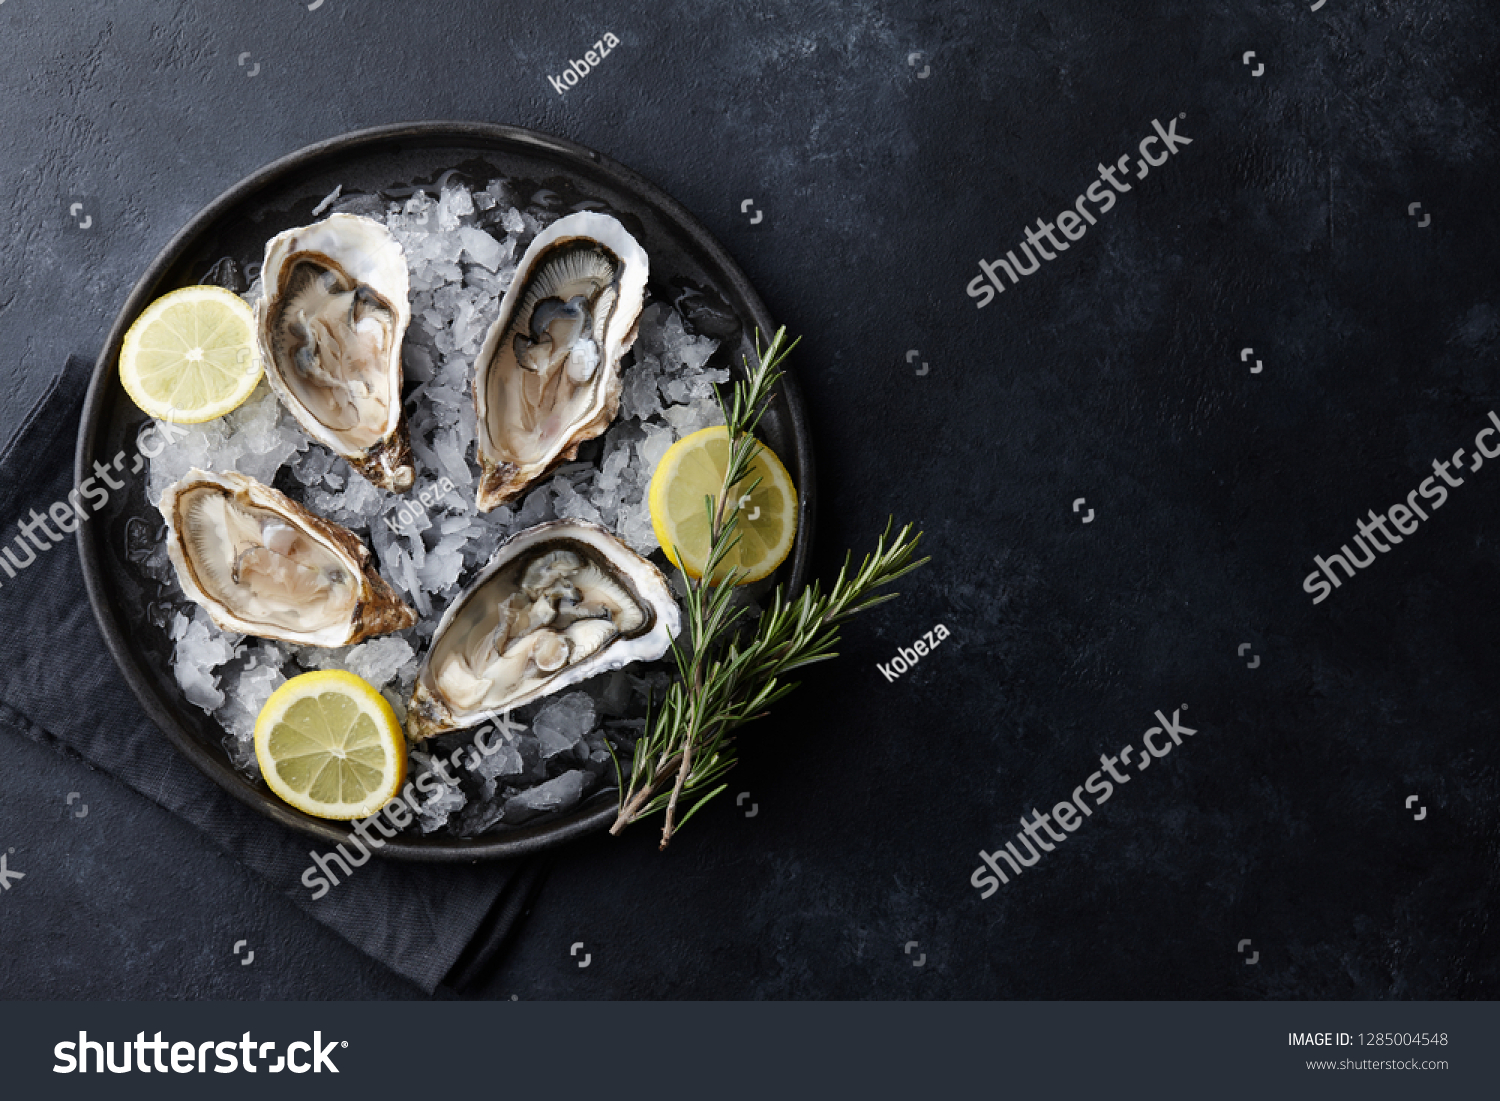 Fresh opened oysters in a plate with ice and lemon on black textured background, top view #1285004548